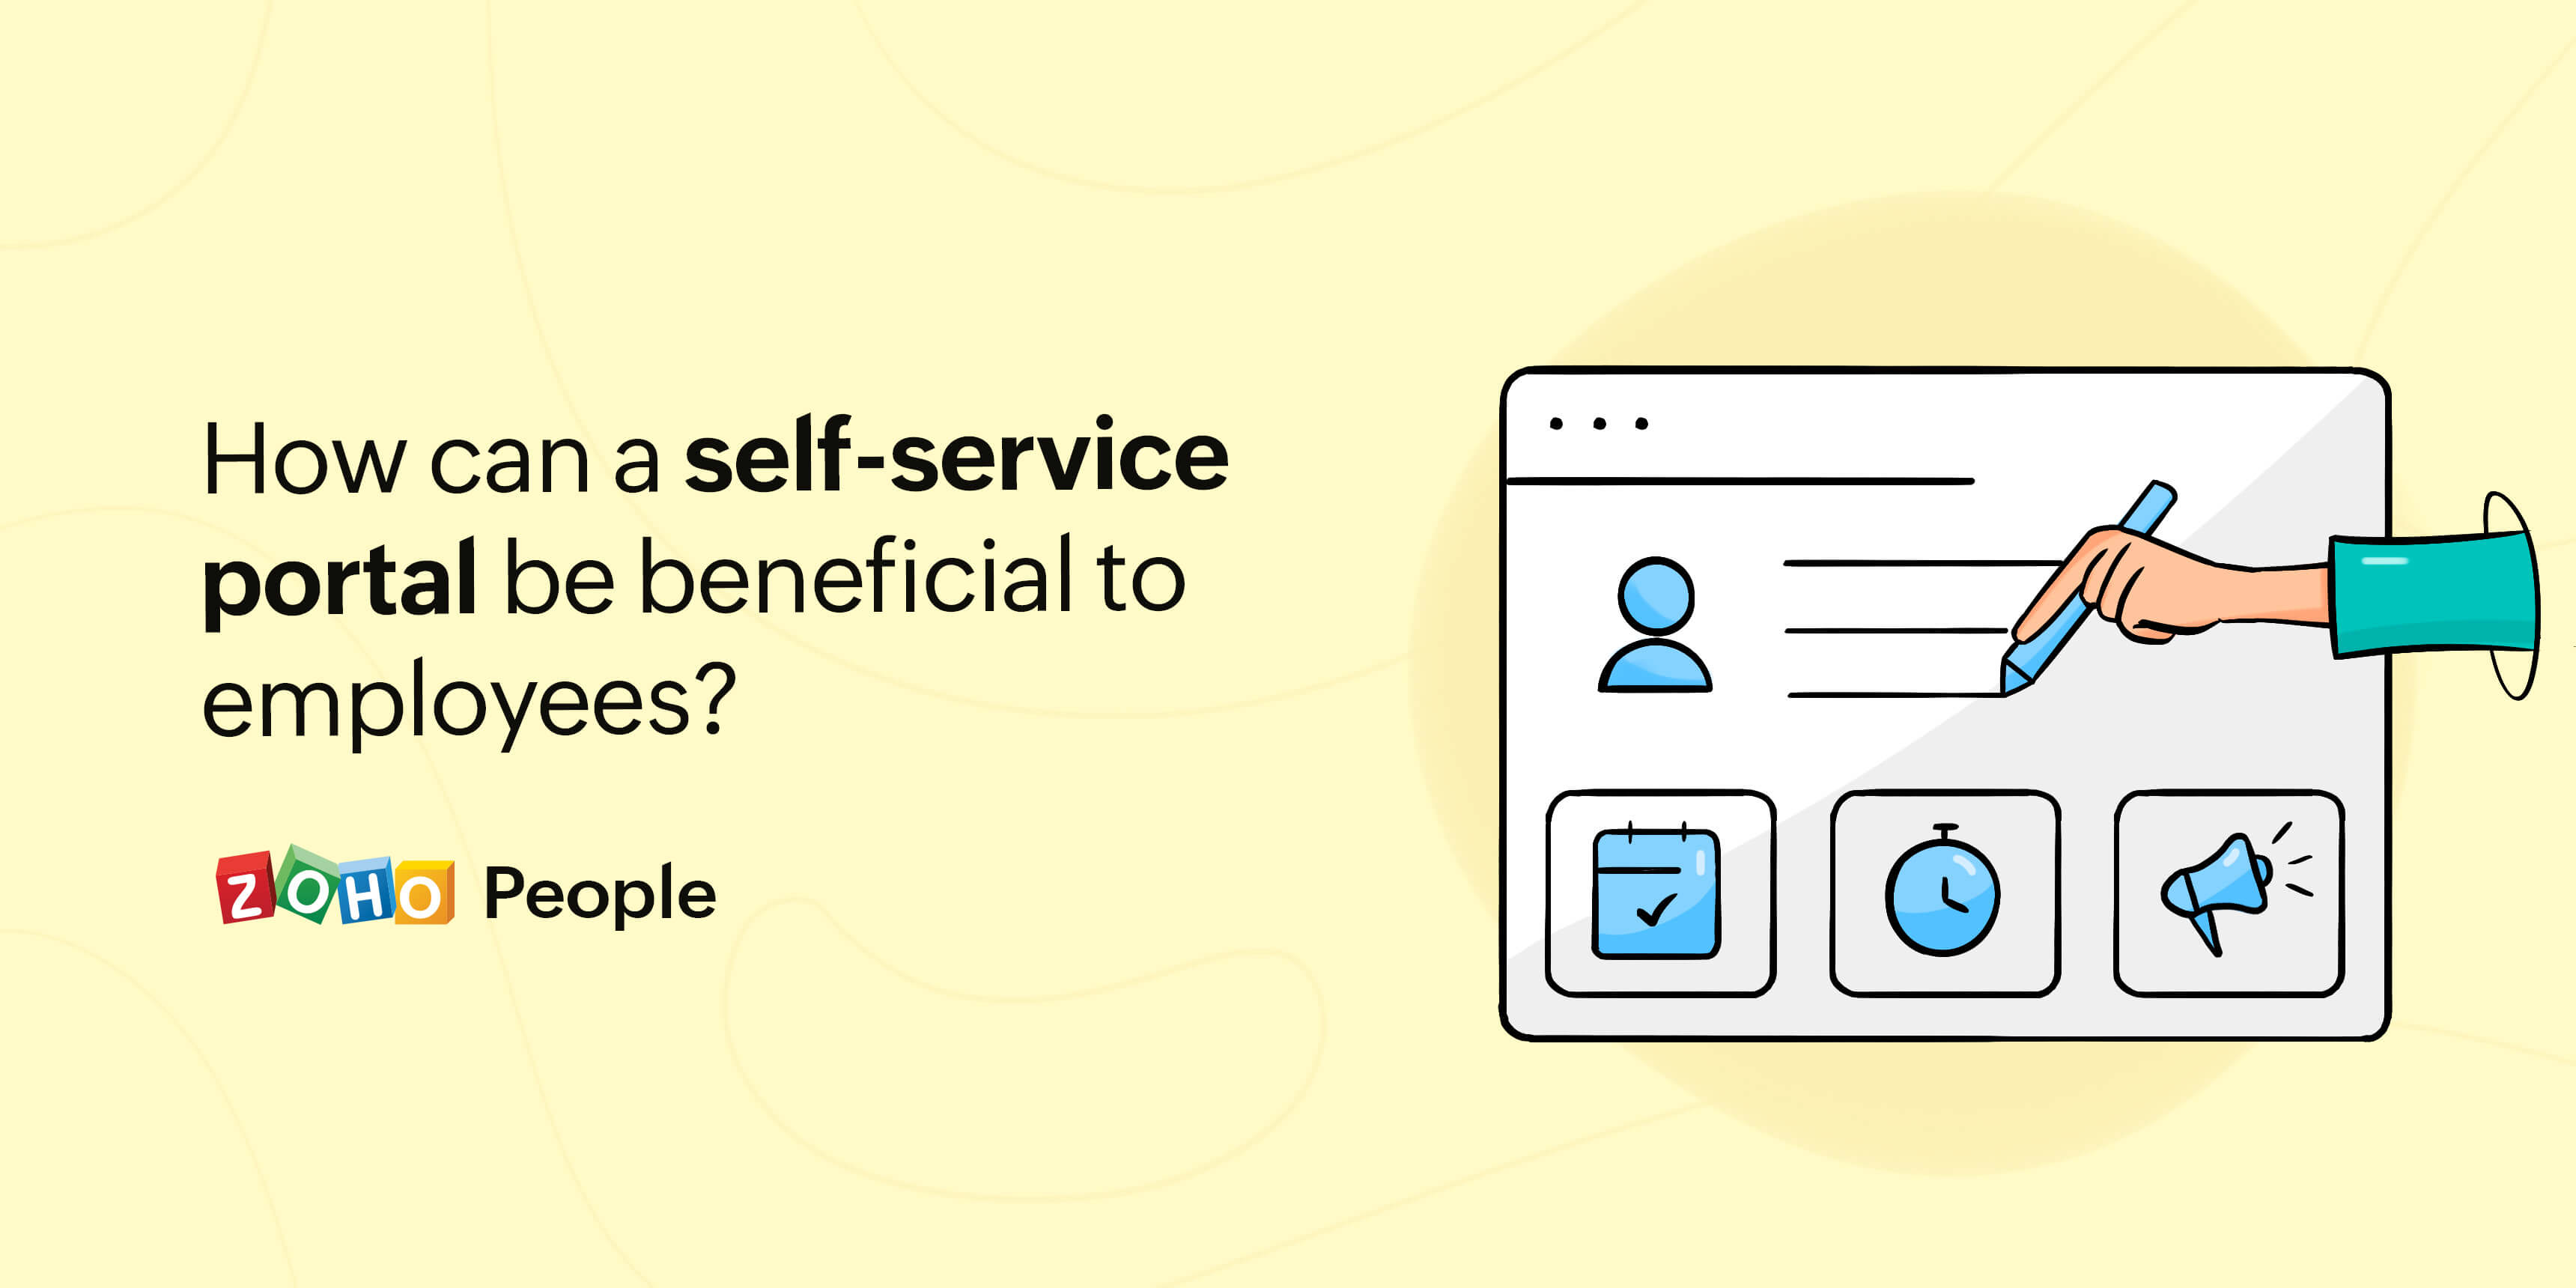 How can an employee self-service portal be useful to employees?